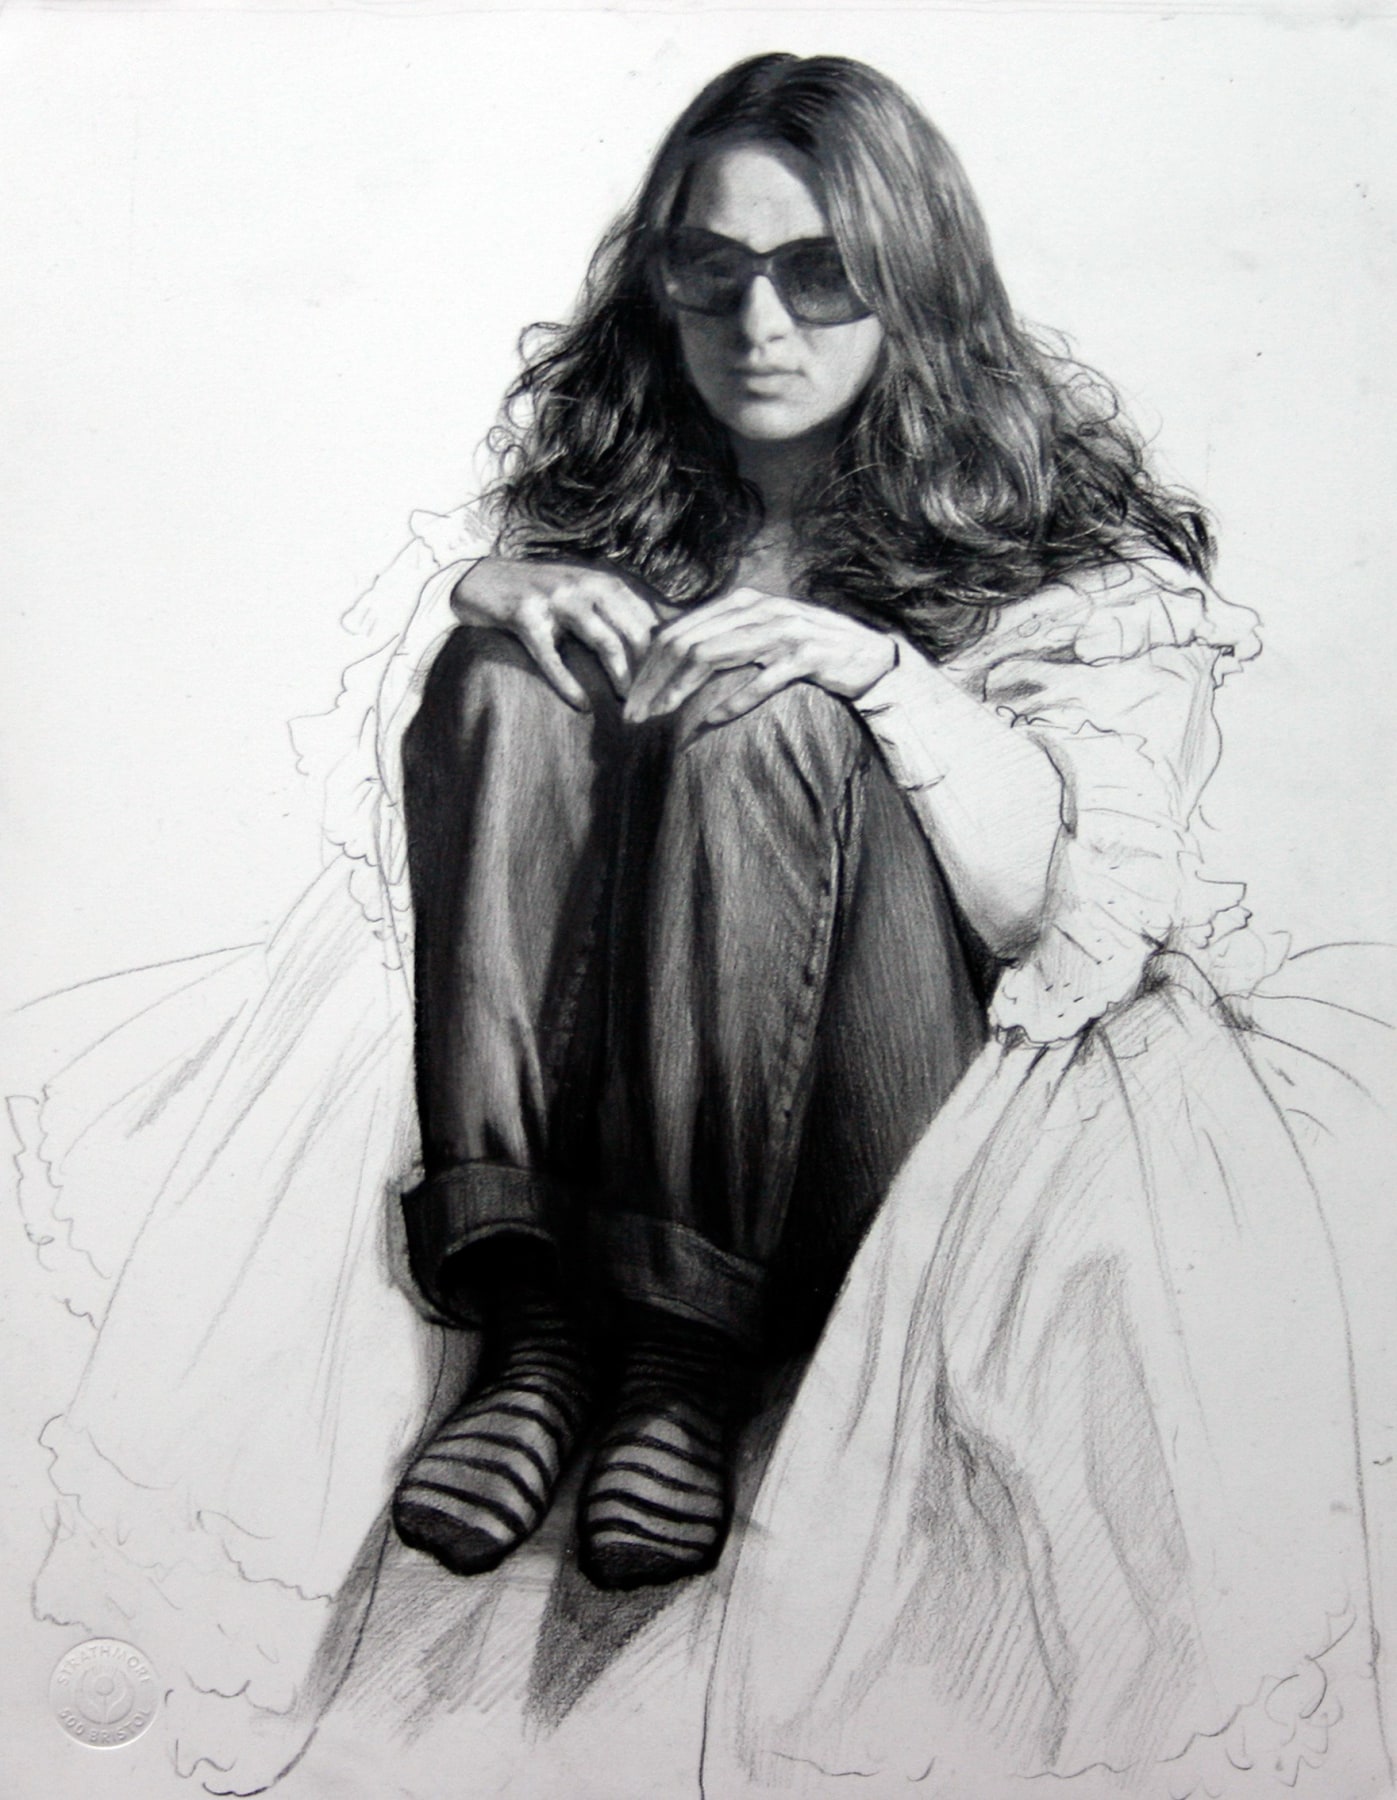 Steven Assael, Girl with Sunglasses (SOLD), 2008, crayon and graphite on paper, 14 1/8 x 11 inches